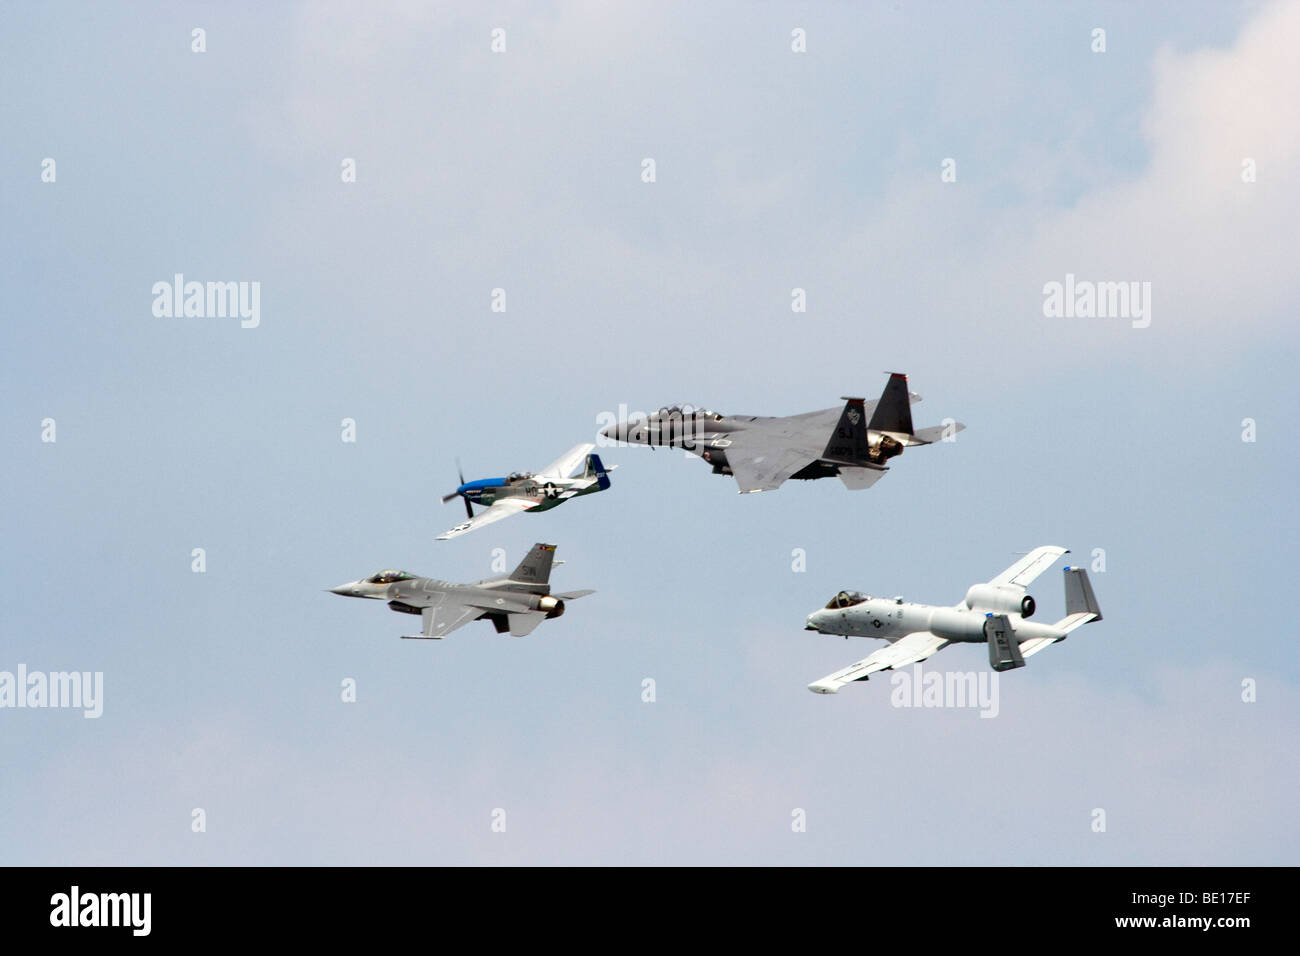 Chicago Air & Water Show 2009.  US Military Planes: F-15 , F-16,  A-10 Demo, P-51 Mustang Stock Photo